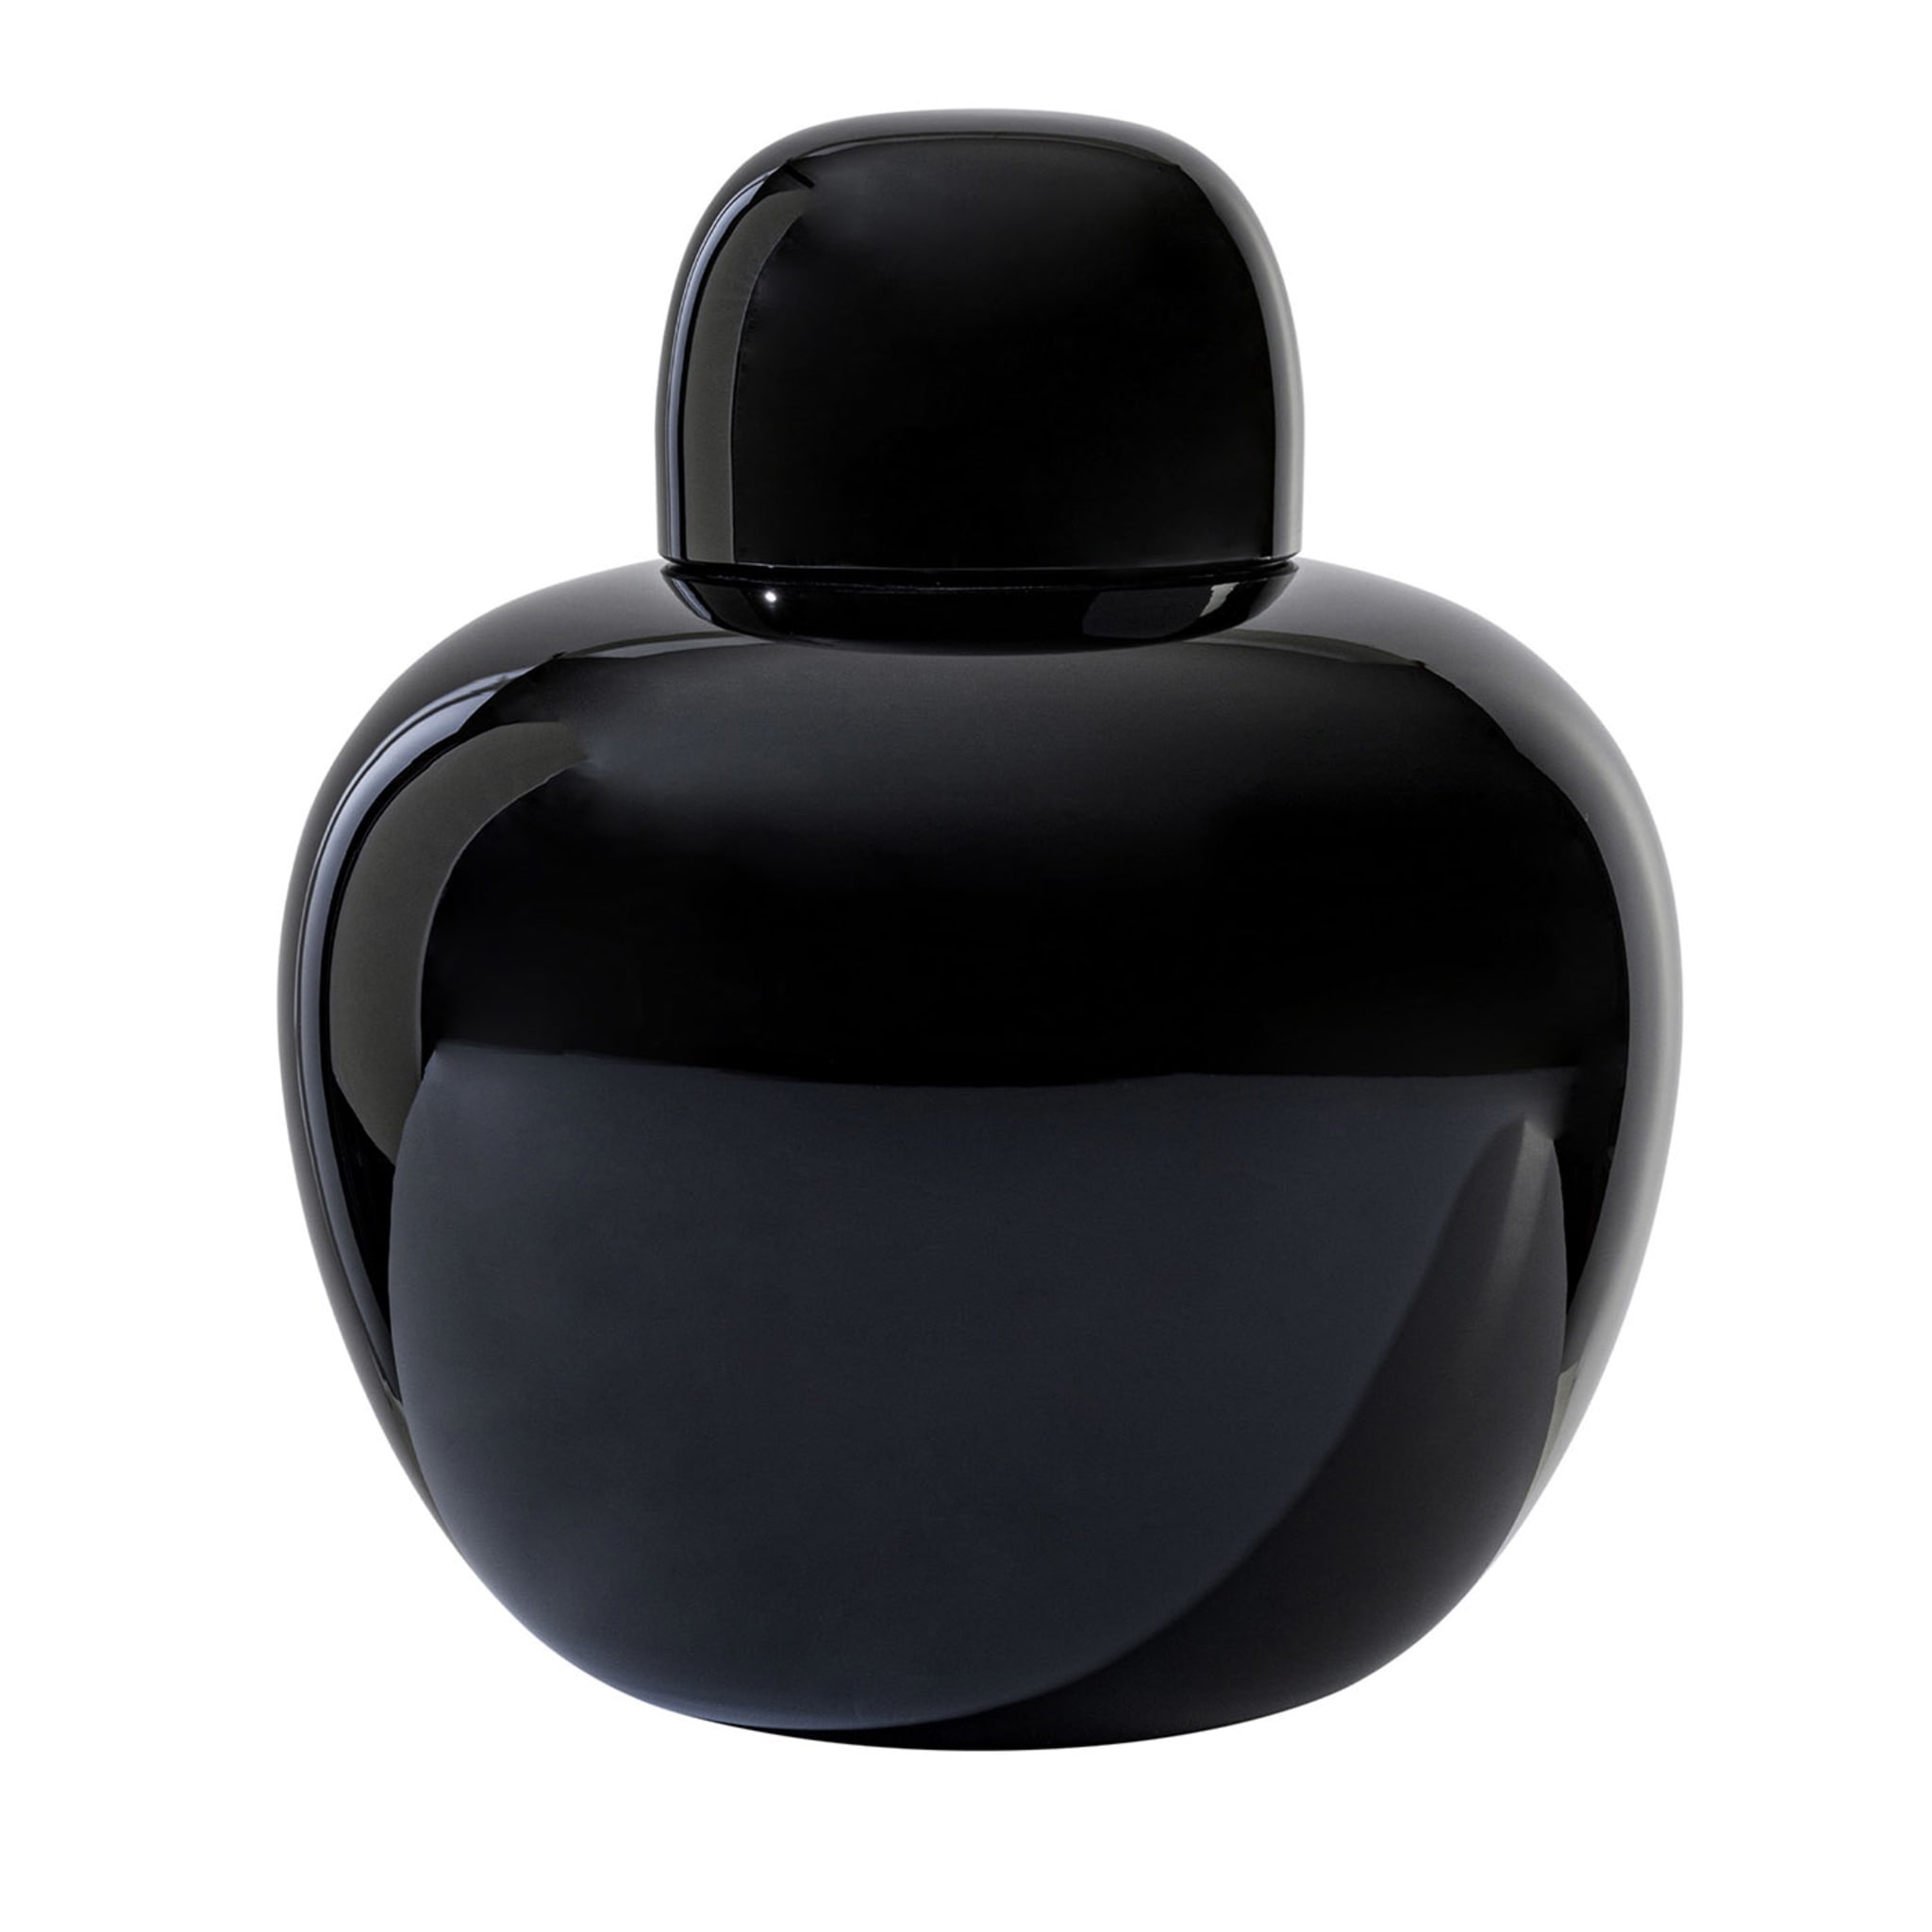 Opaco Black Vase with Cap by Tobia Scarpa - Main view